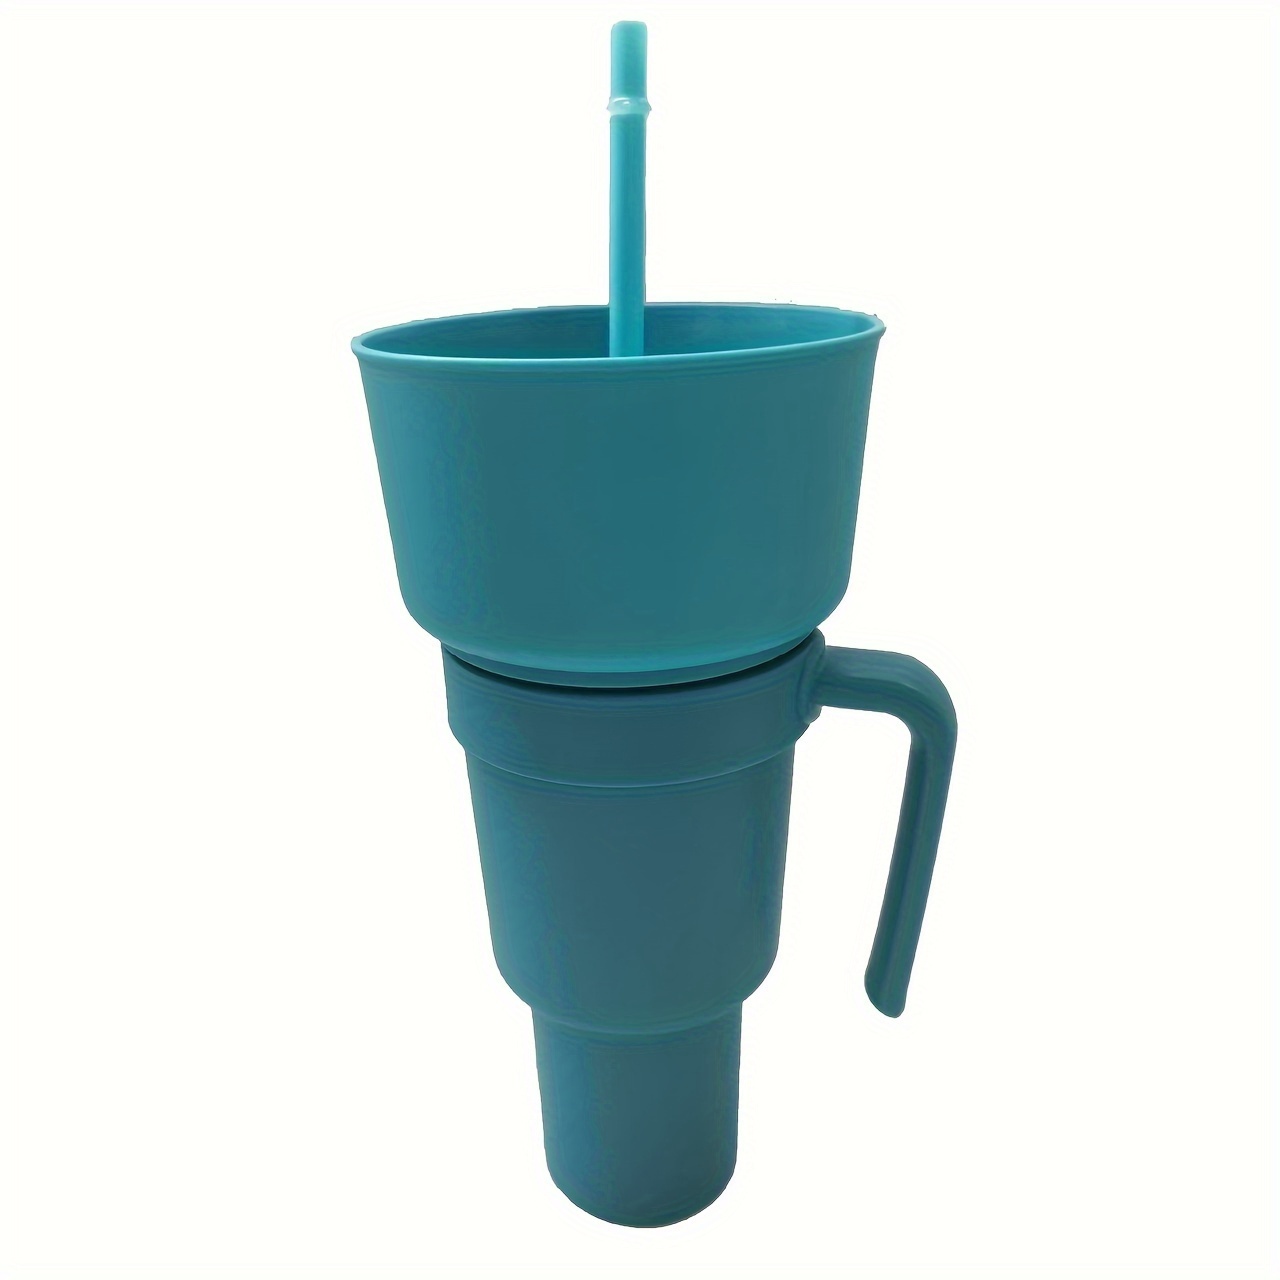 Snack Tumbler With Lid and Straw Stadium Tumbler Cups with Bowl on Top  2-in-1 Travel Coffee Mug Proo…See more Snack Tumbler With Lid and Straw  Stadium